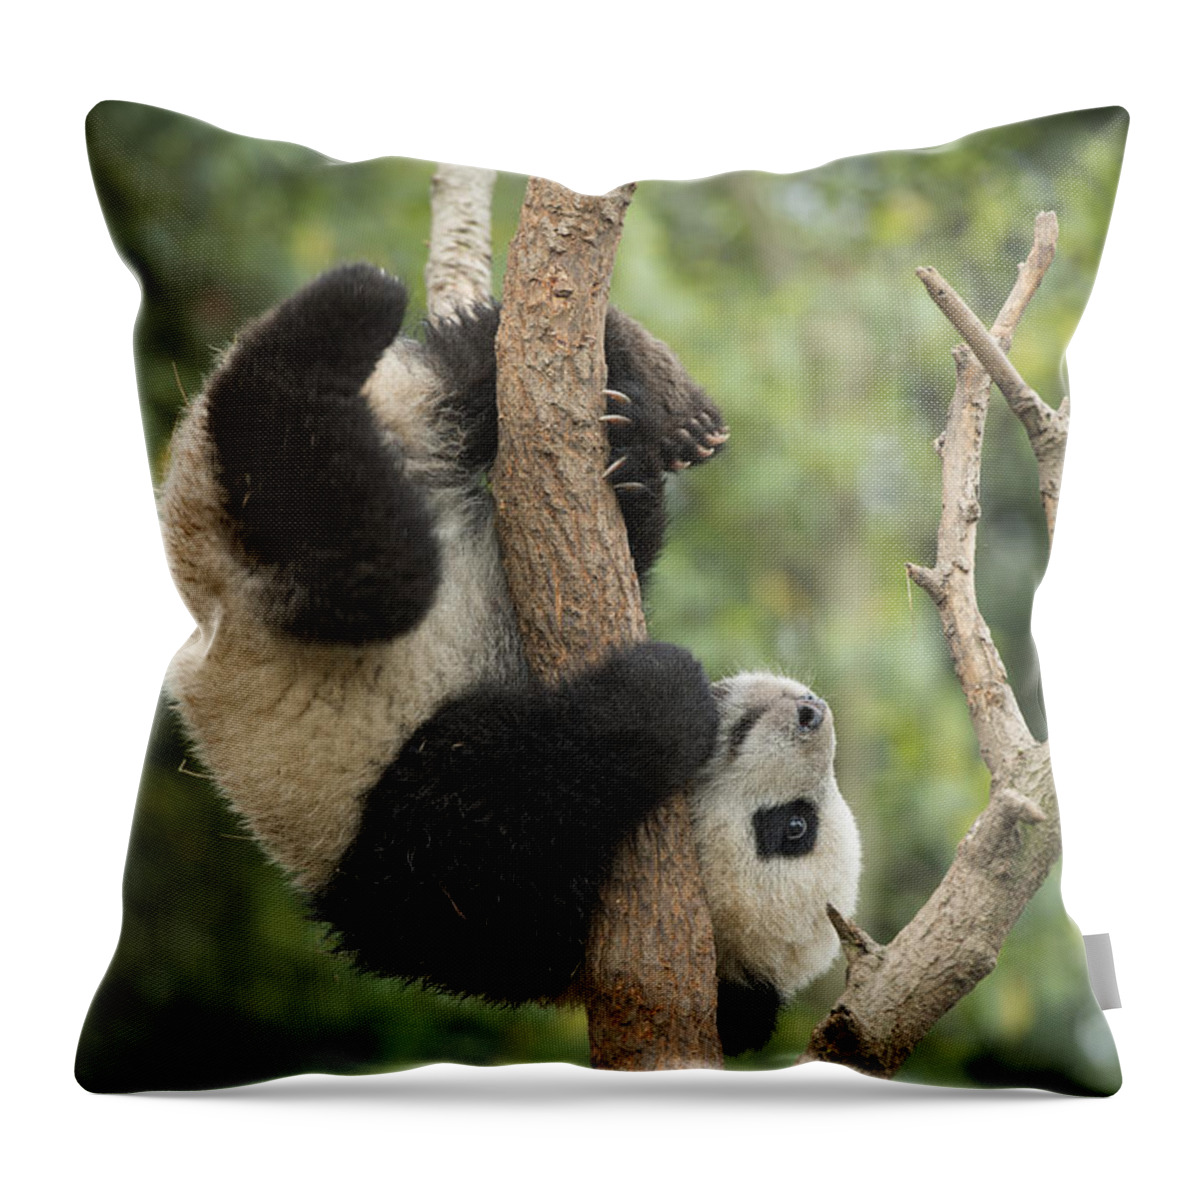 Katherine Feng Throw Pillow featuring the photograph Giant Panda Cub In Tree Chengdu Sichuan by Katherine Feng